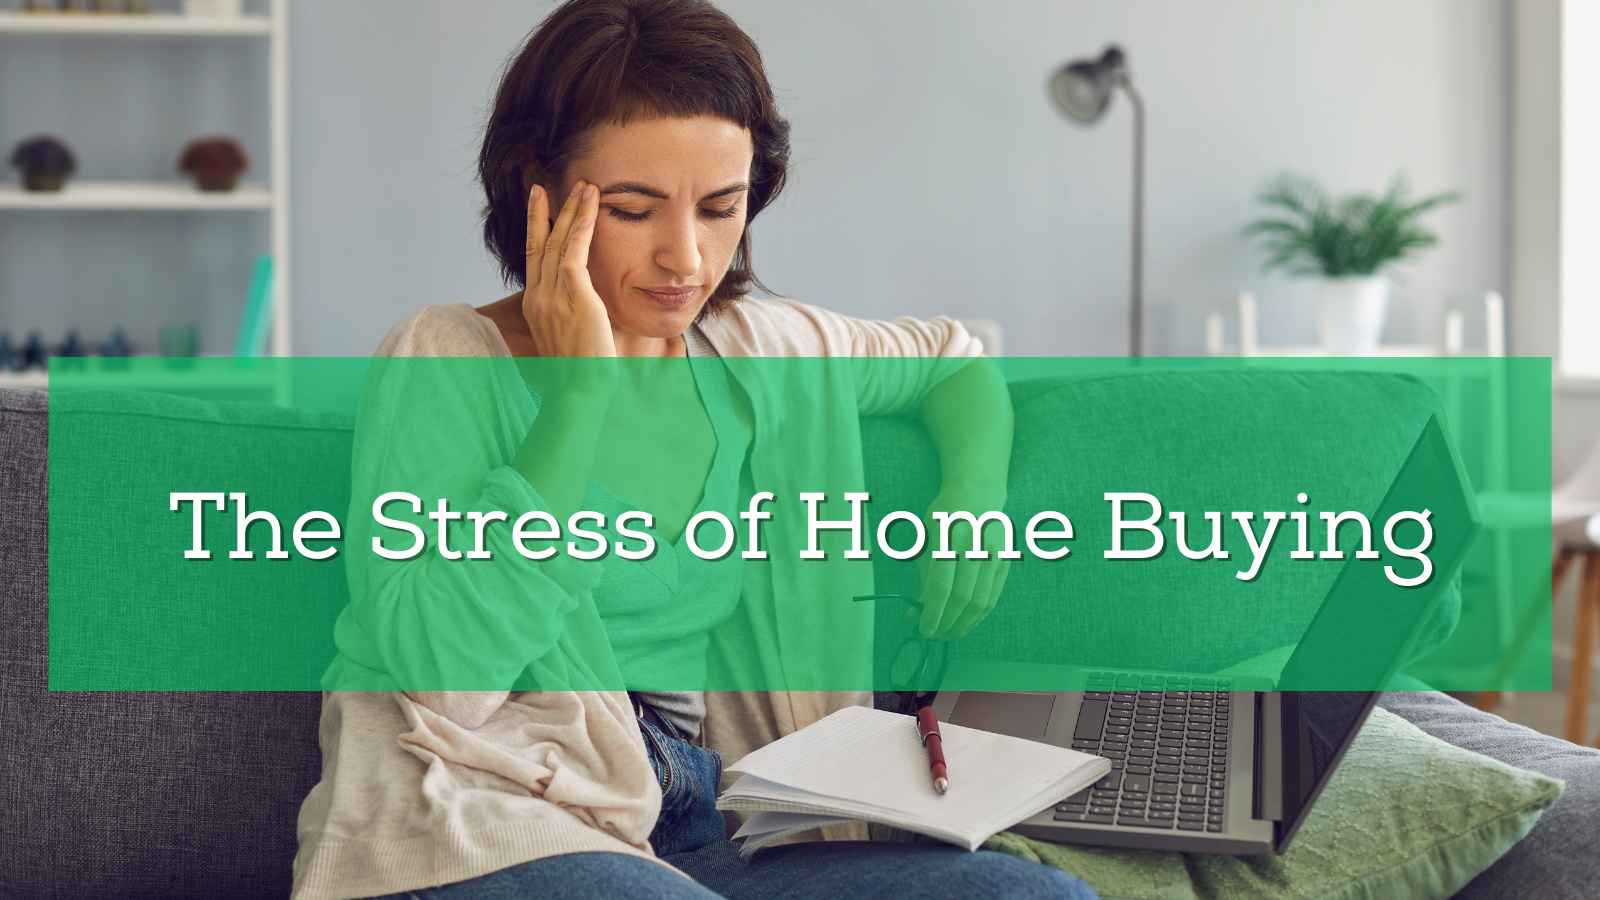 A woman holds her head because of the stress of home buying